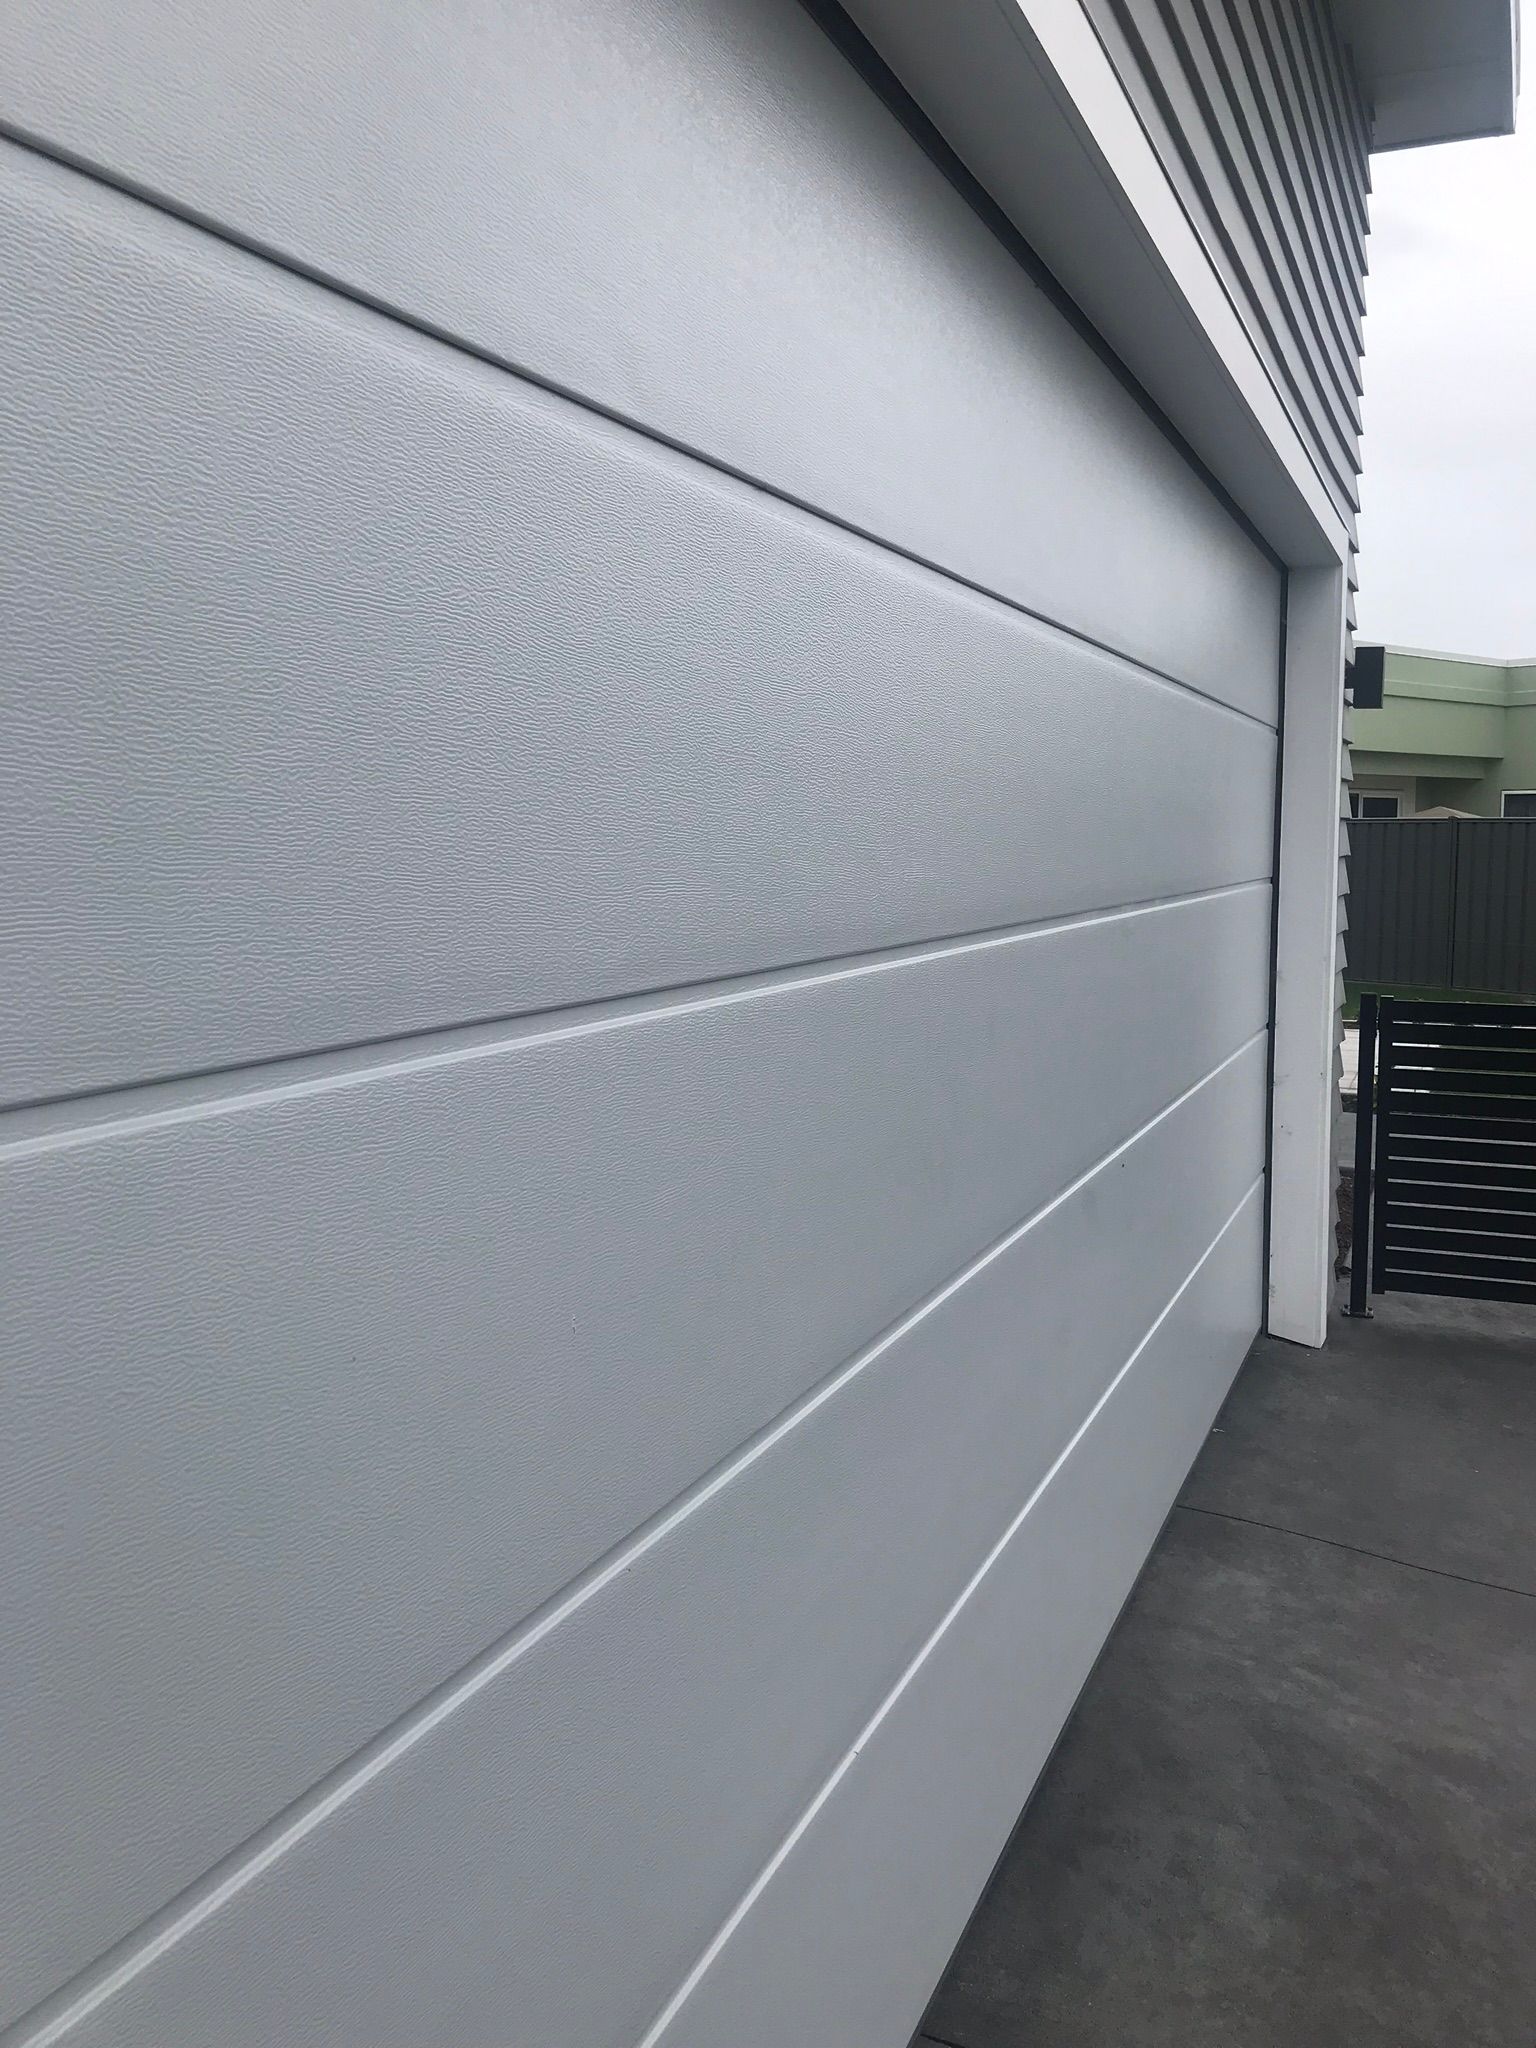 A close up of a white garage door on a building